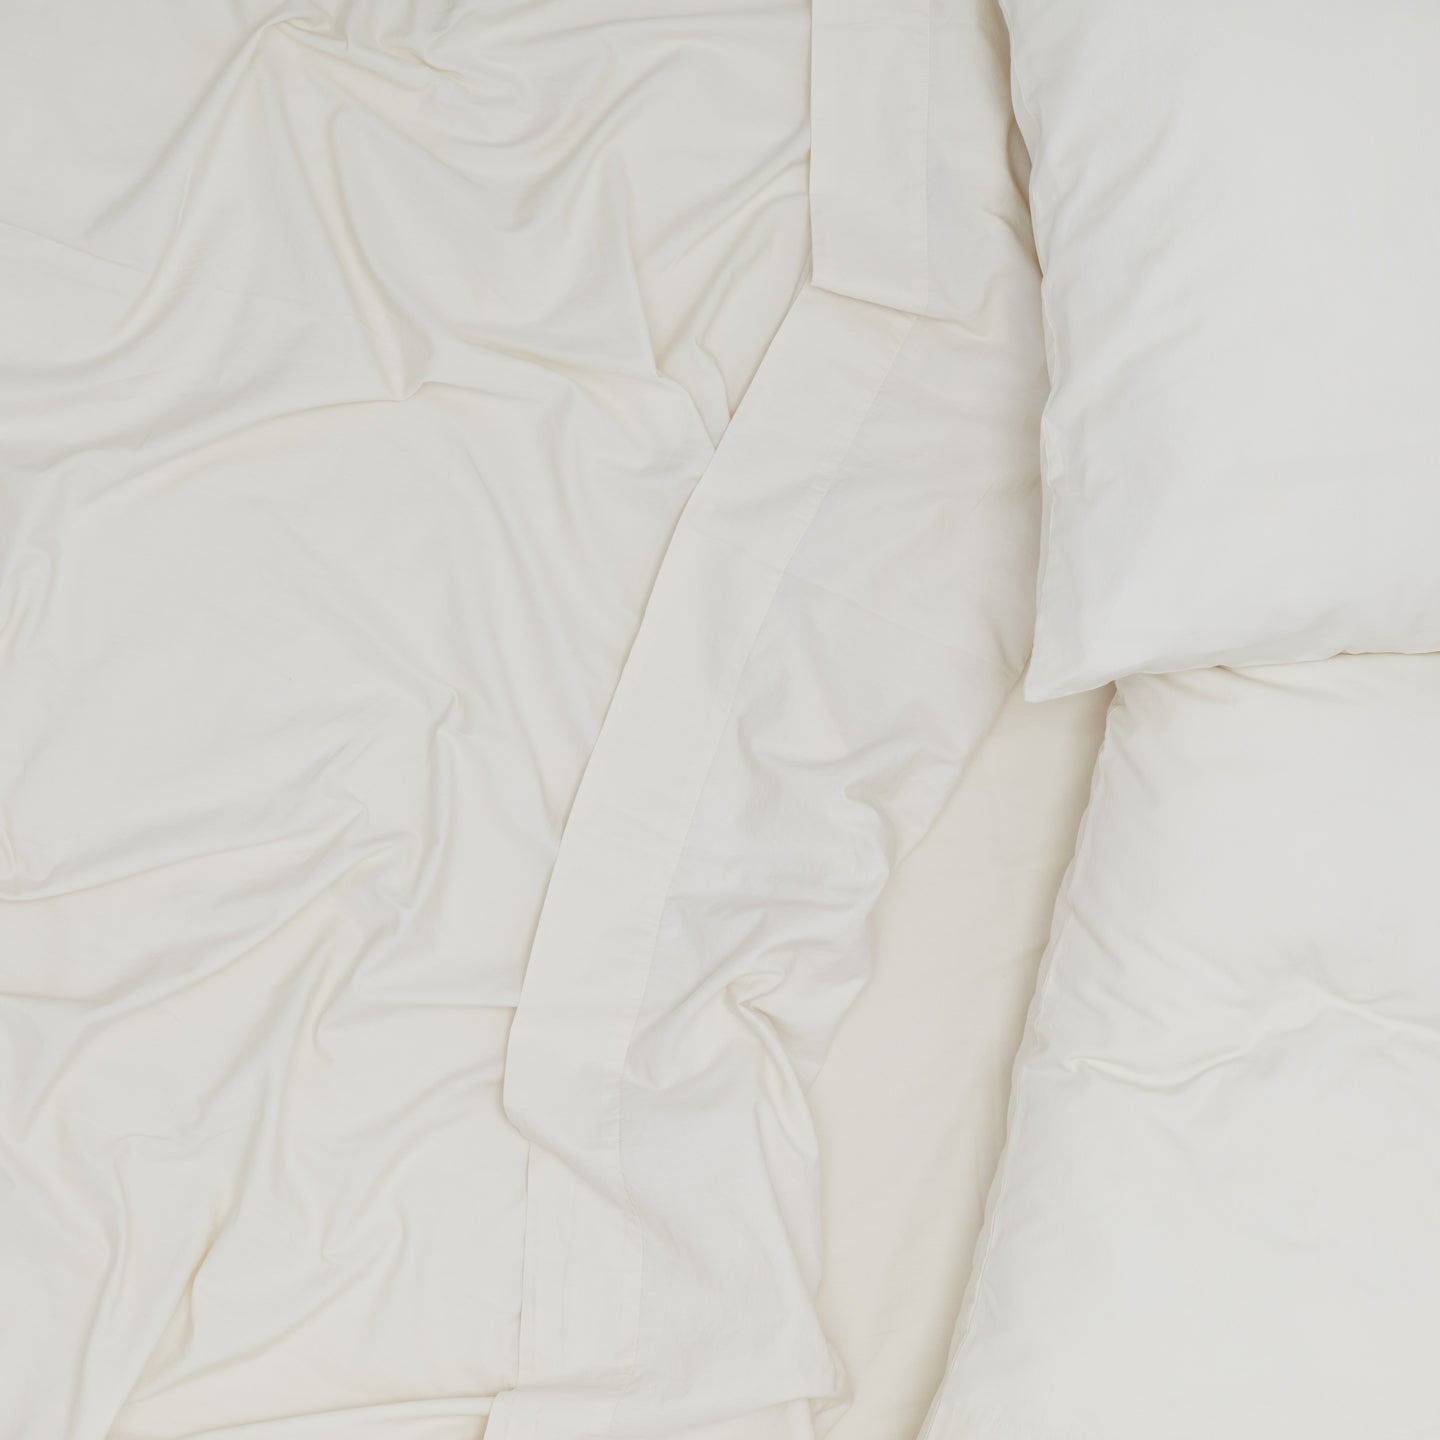 Essential Percale Pillowcases, Set of 2 - Ivory